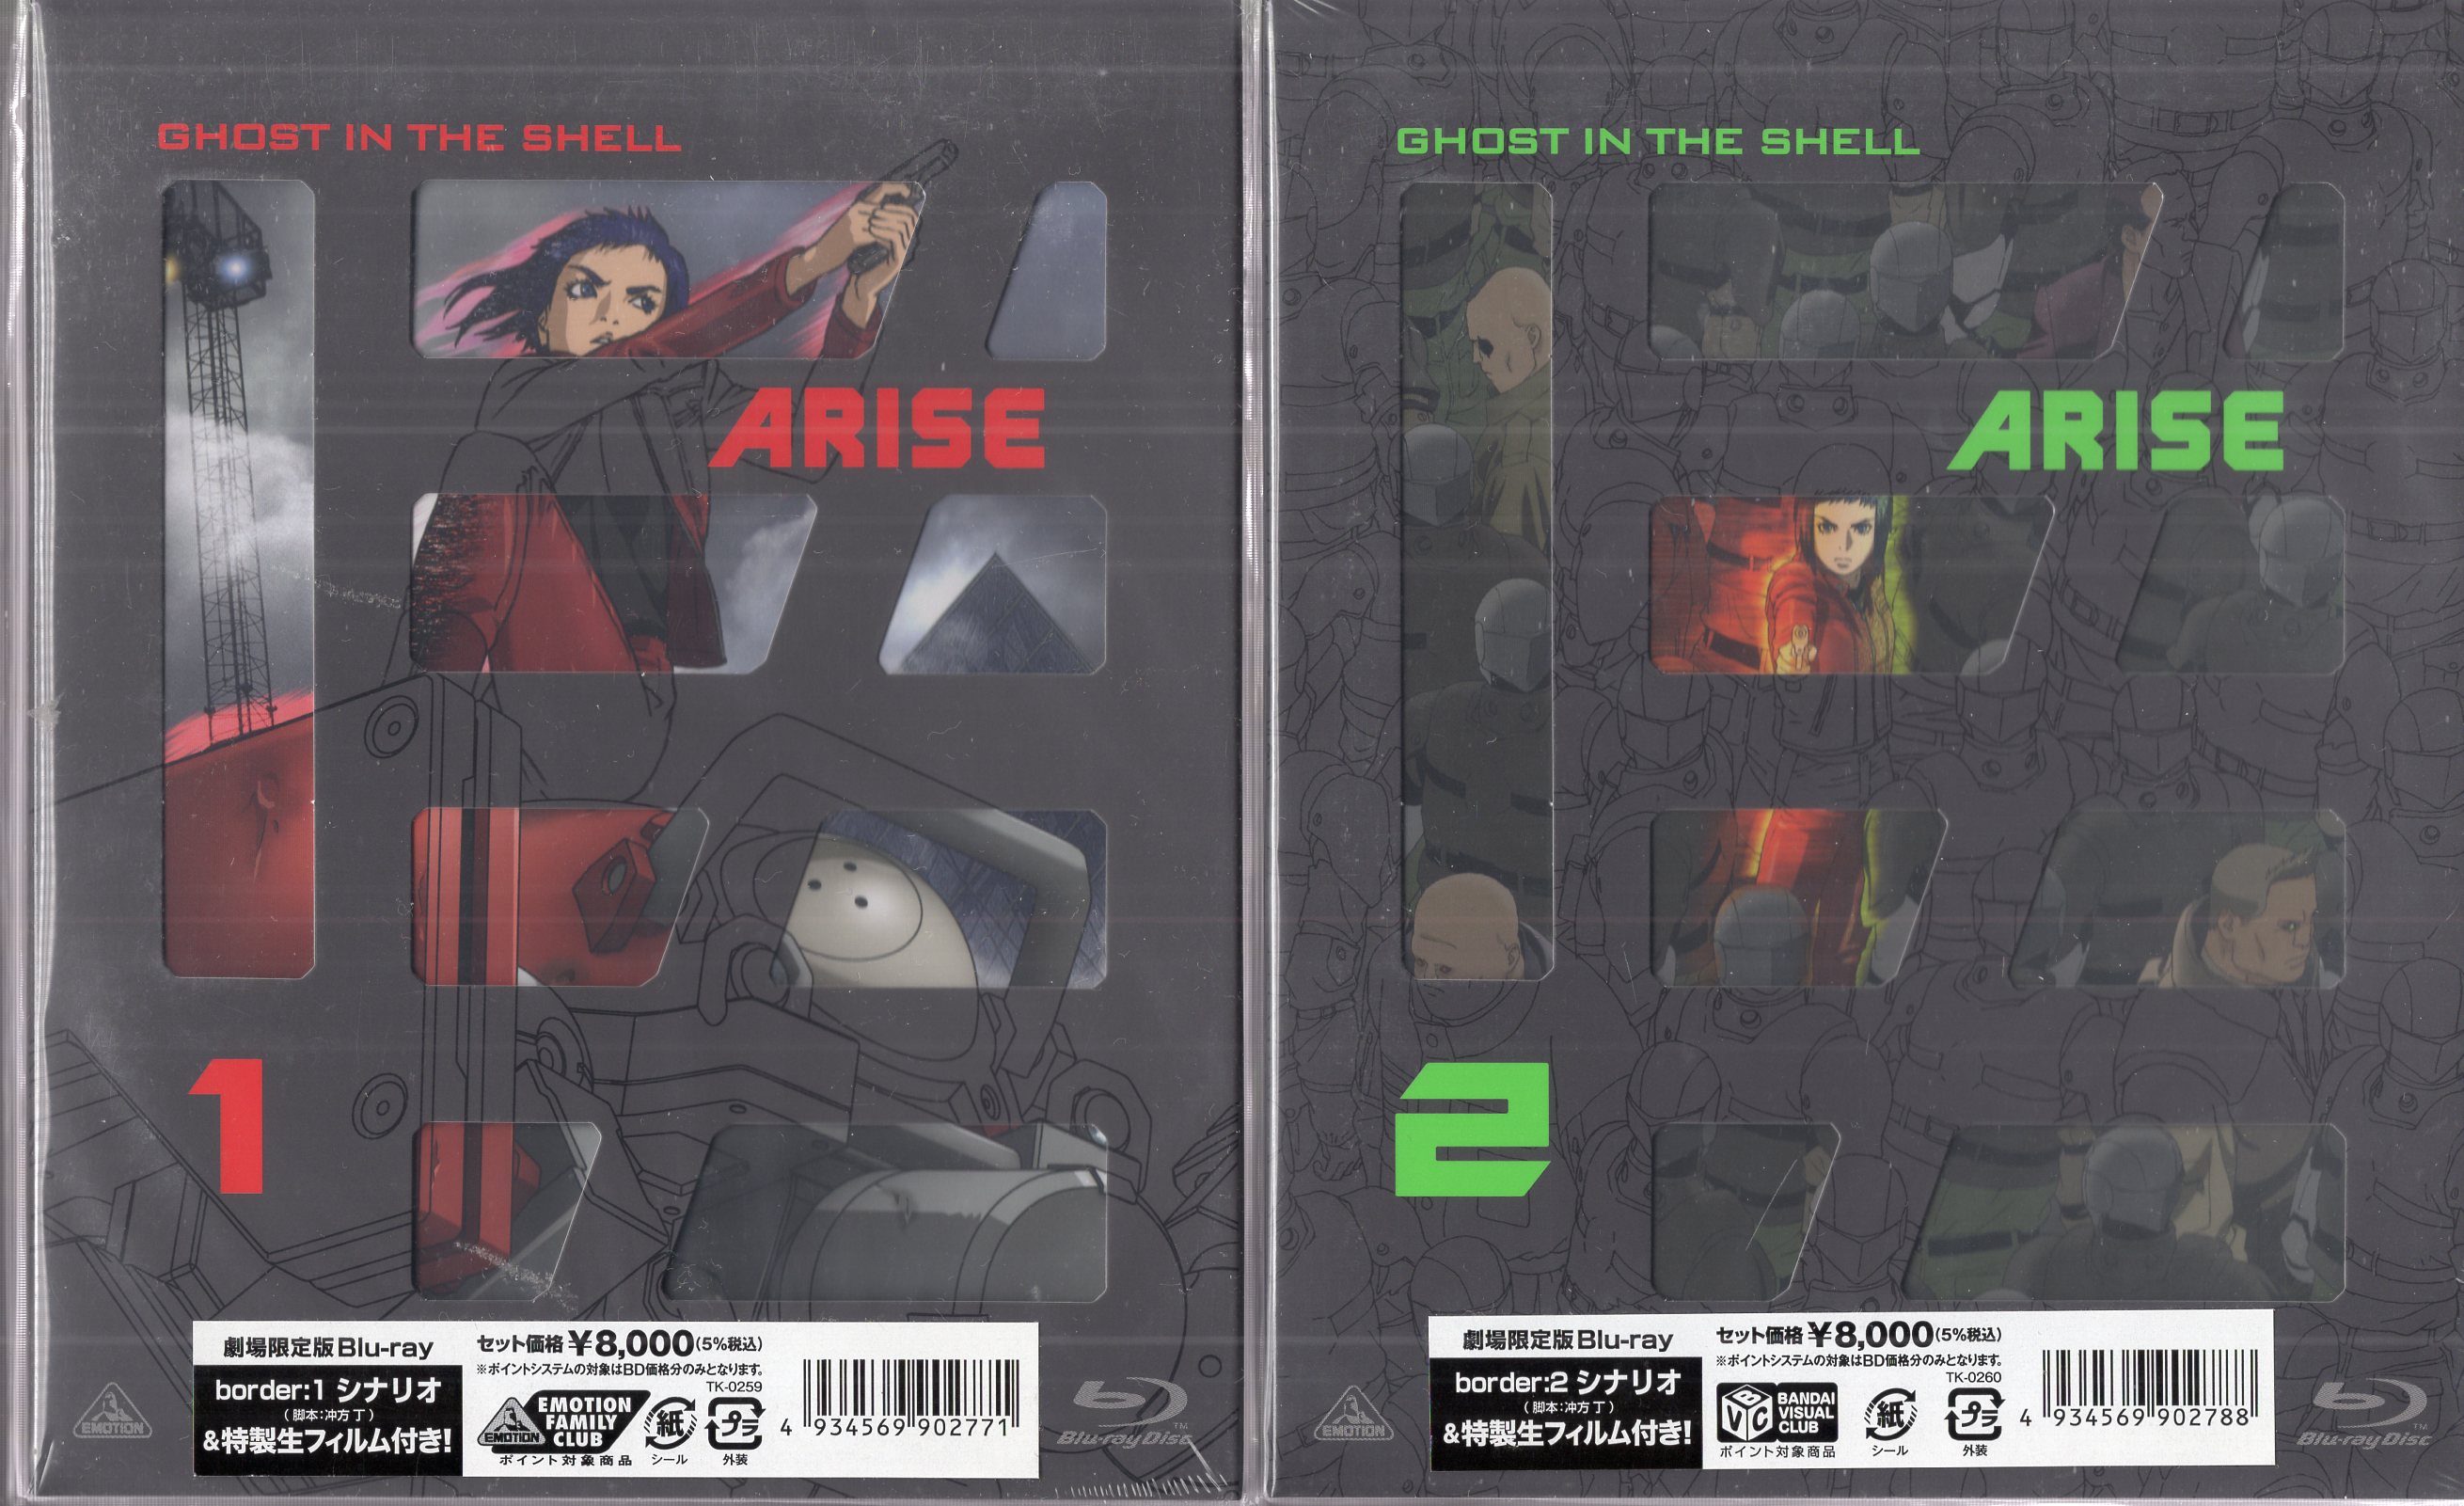 Online　Volume　Limited　ARISE　Ghost　Theater　Complete　Edition　Mandarake　Blu-Ray　The　In　Set　Shop　Anime　Shell